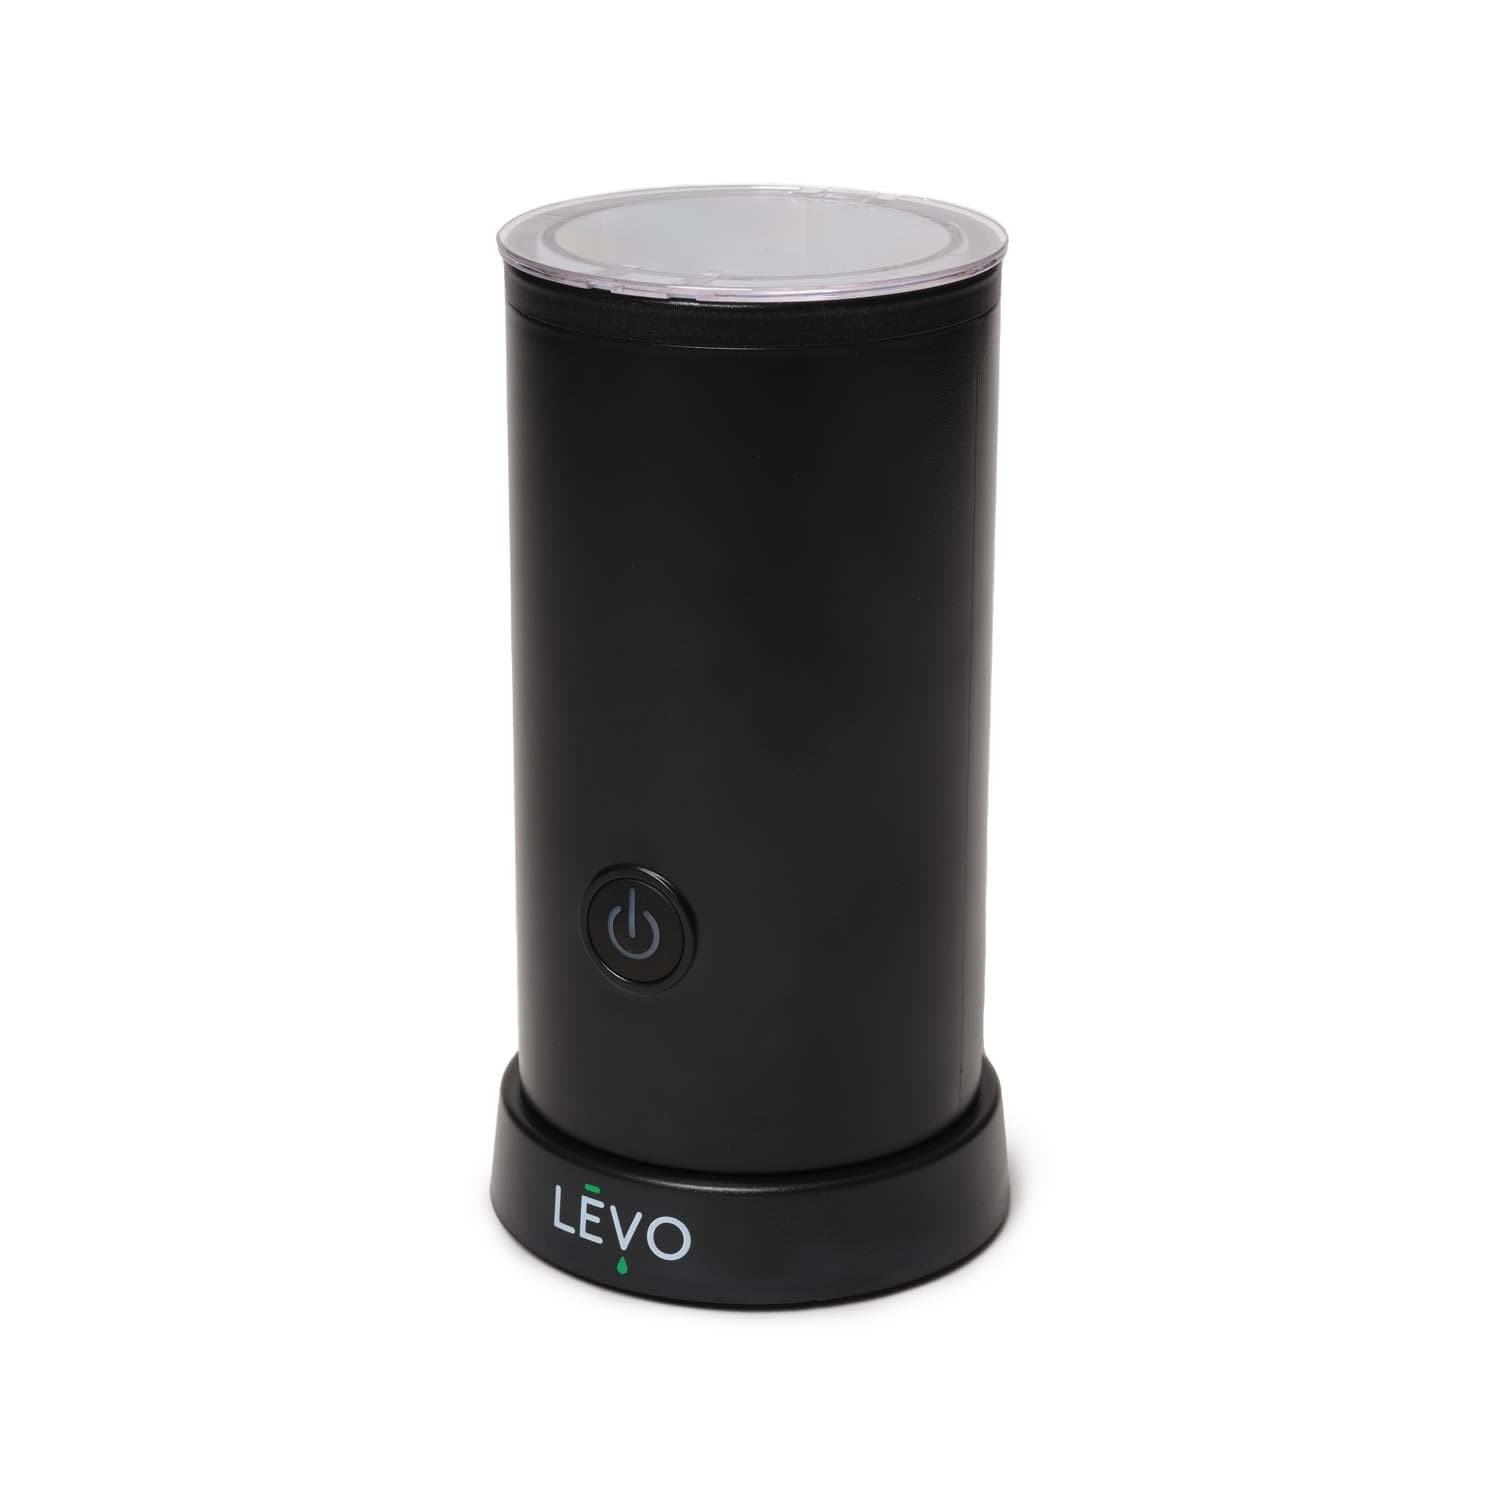 LĒVO Gummy Candy Mixer for Making Infused Edibles - LEVO Oil Infusion, Inc.